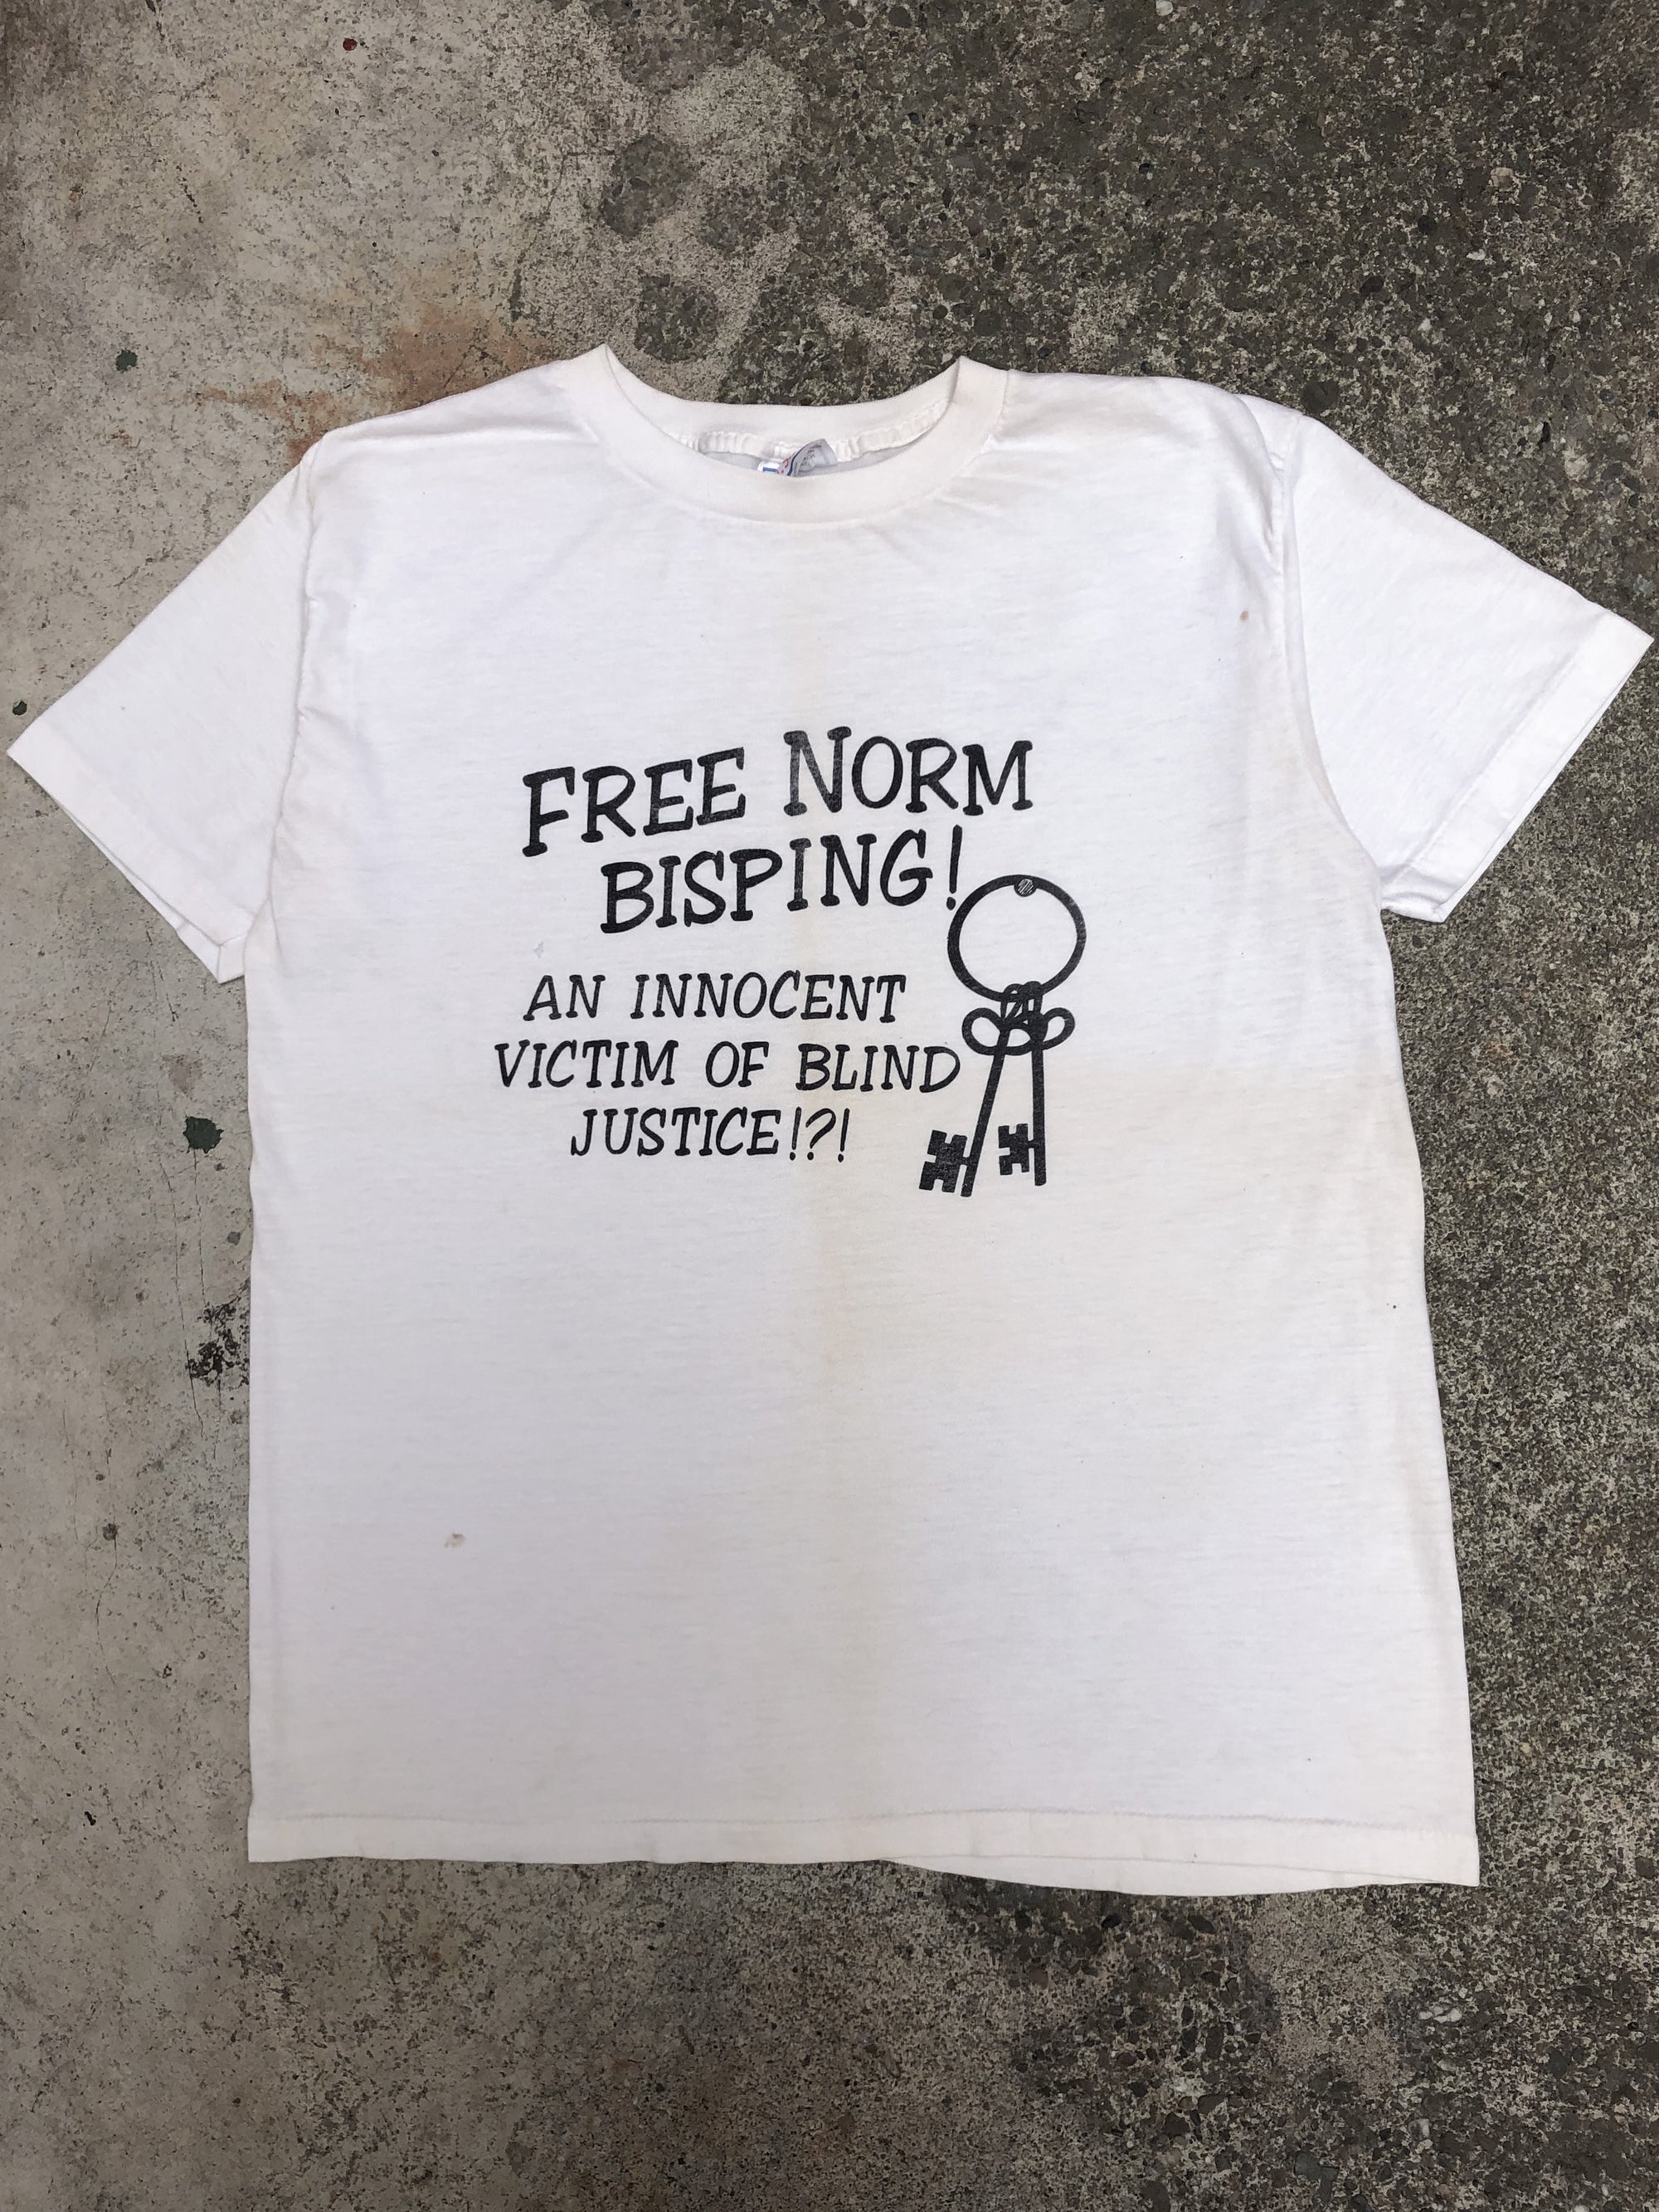 1980s “Free Norm Bisping!” Tee (M)